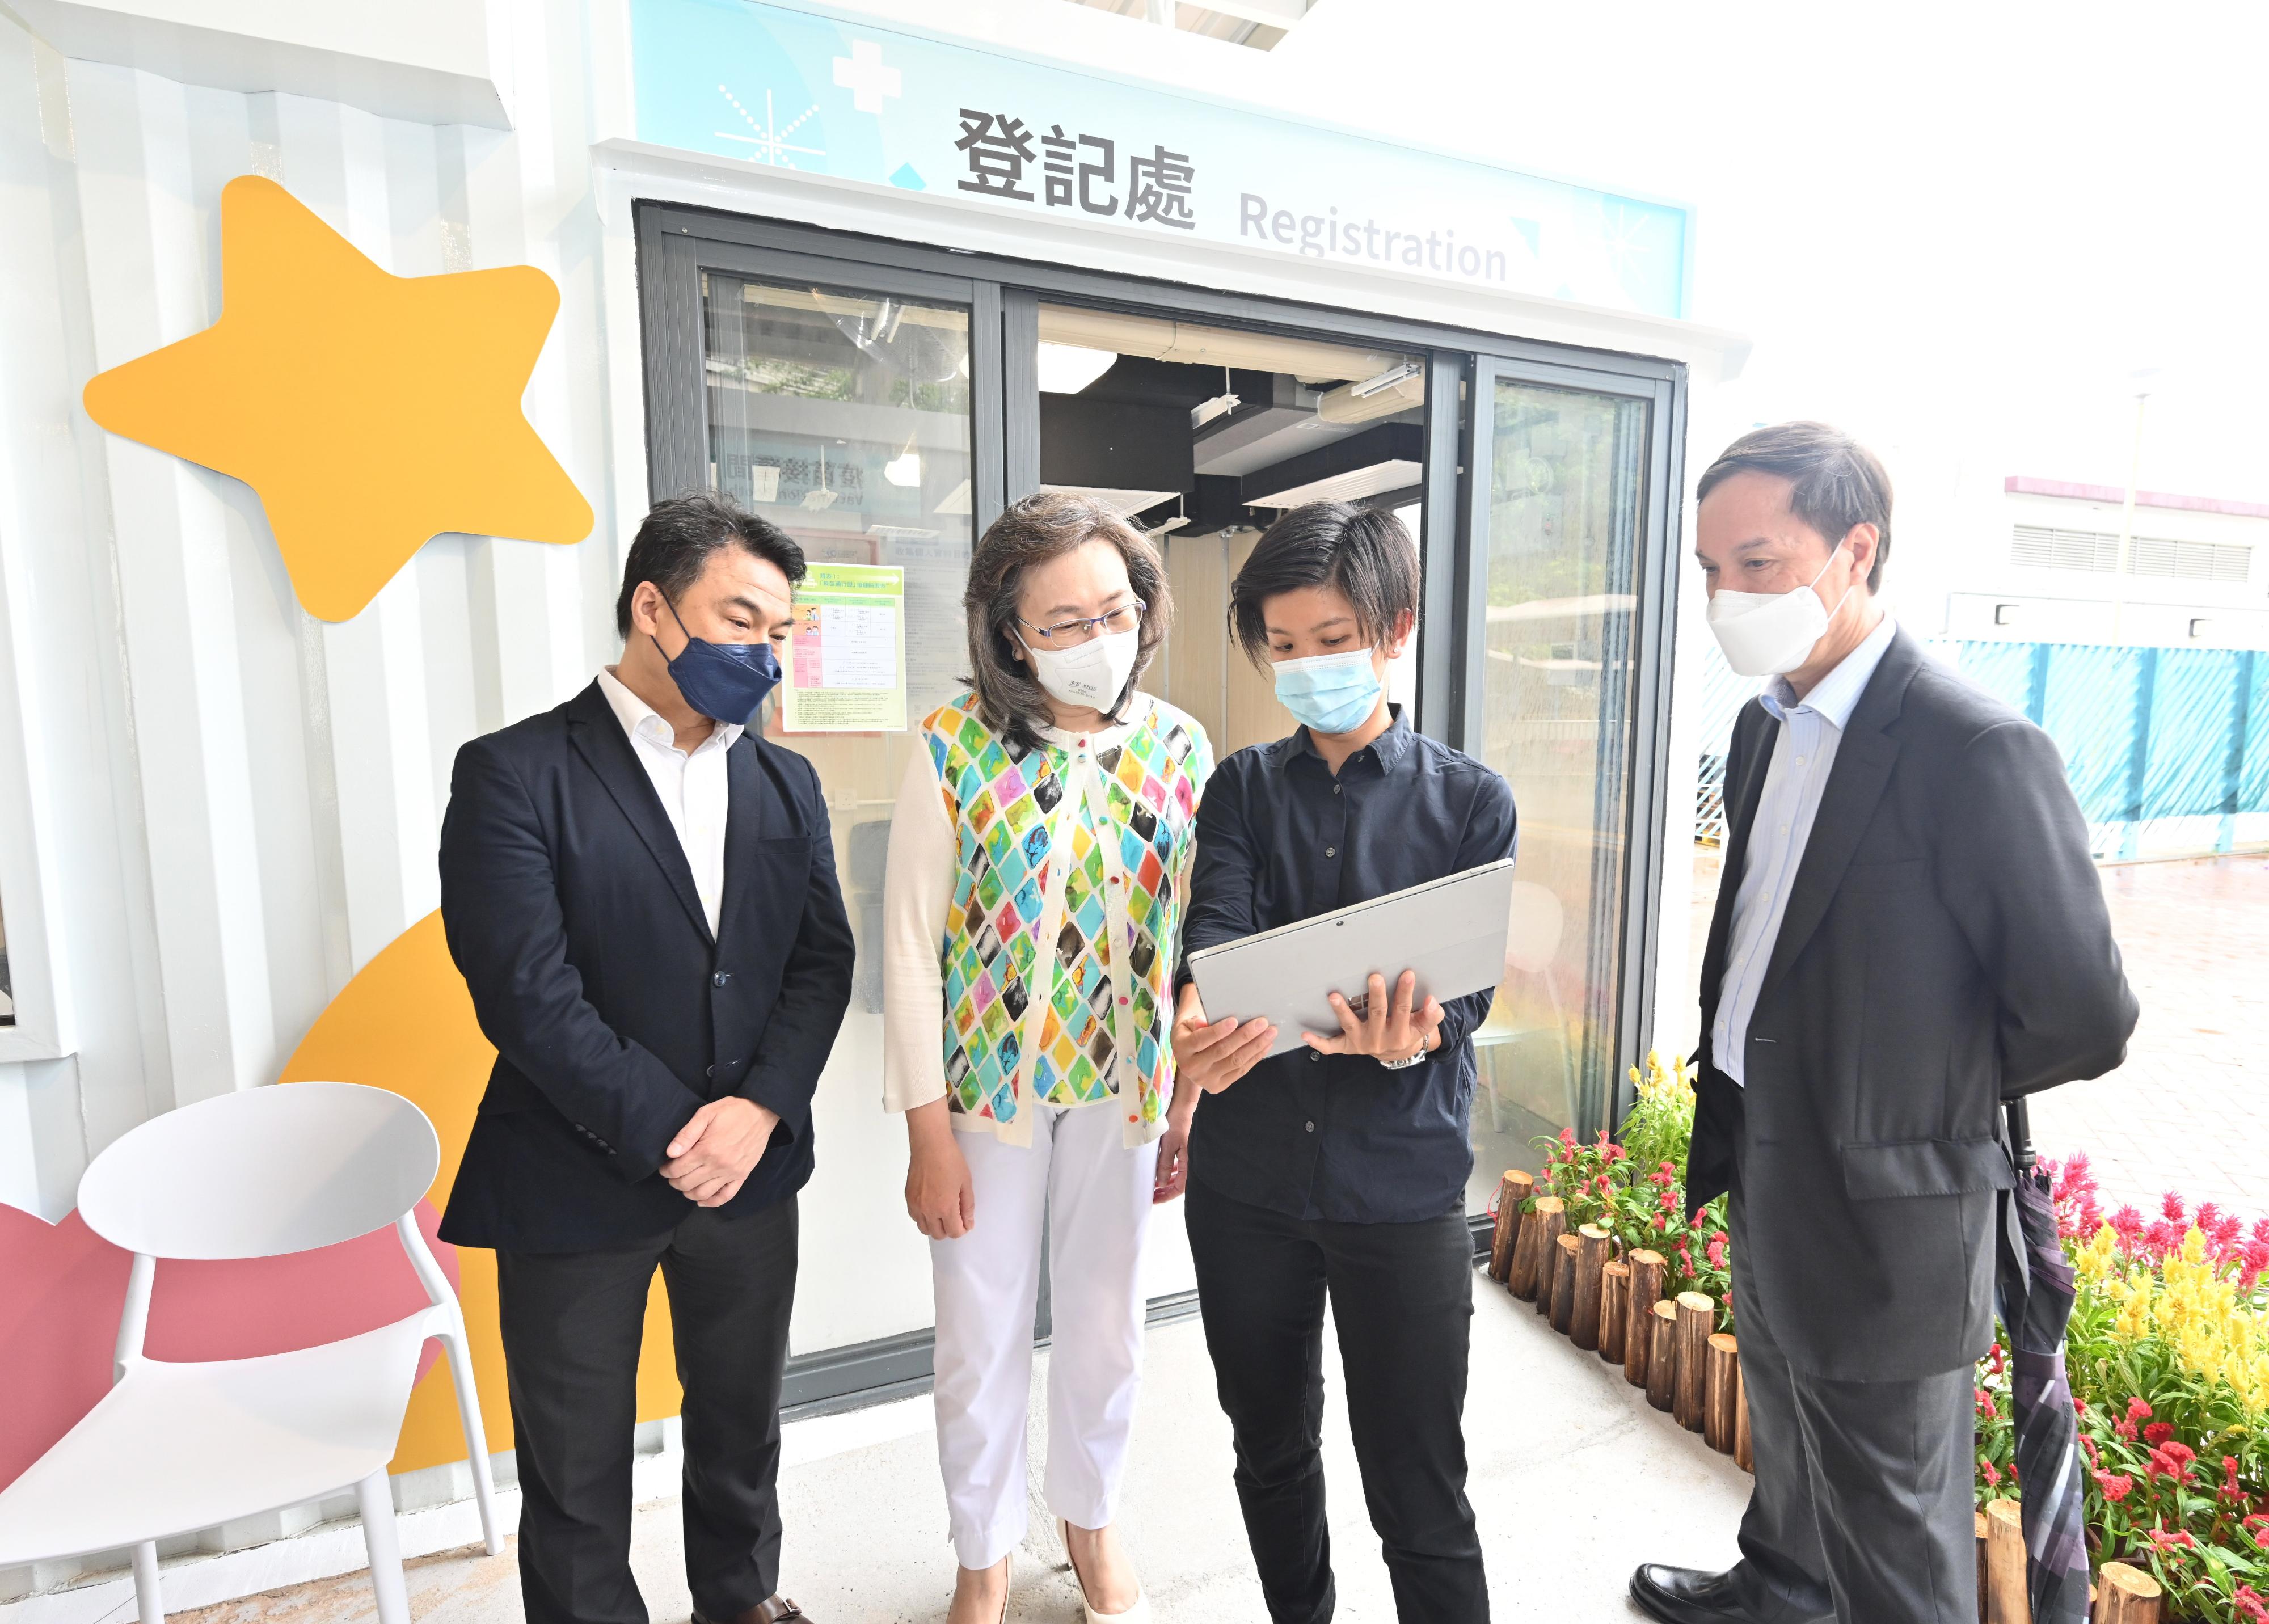 The Secretary for the Civil Service, Mrs Ingrid Yeung, visited the Lai Chi Kok Park Community Vaccination Station (CVS) today (September 29) to see its readiness for coming into operation tomorrow (September 30). Photo shows Mrs Yeung (second left) being briefed by Property Services Manager of the Architectural Services Department Ms Cheung Tin-man (second right) on the design of the CVS. Looking on are the person-in-charge of the medical partner of the CVS, Dr Samuel Kwok (first left), and the Director of General Grades of the Civil Service Bureau, Mr Hermes Chan (first right).